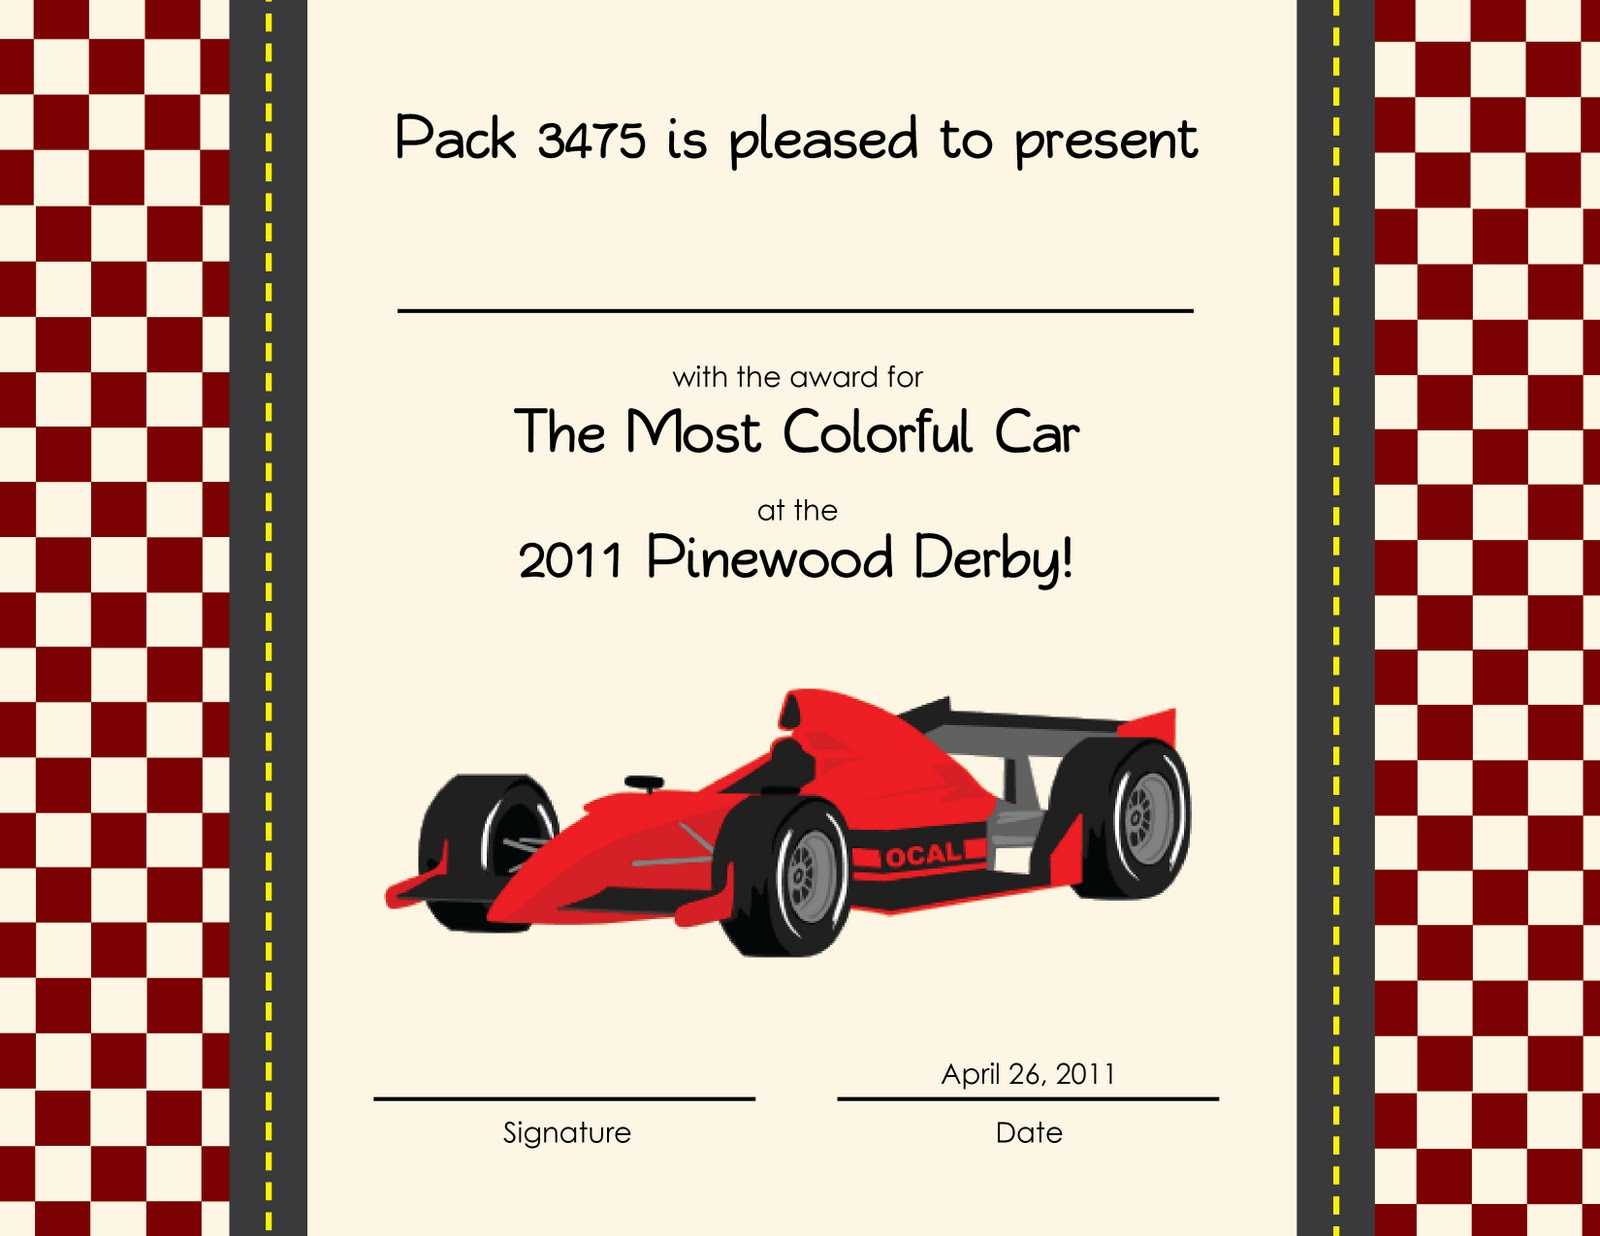 Pinewood Derby Certificate Templates ] – Pinewood Derby Intended For Pinewood Derby Certificate Template